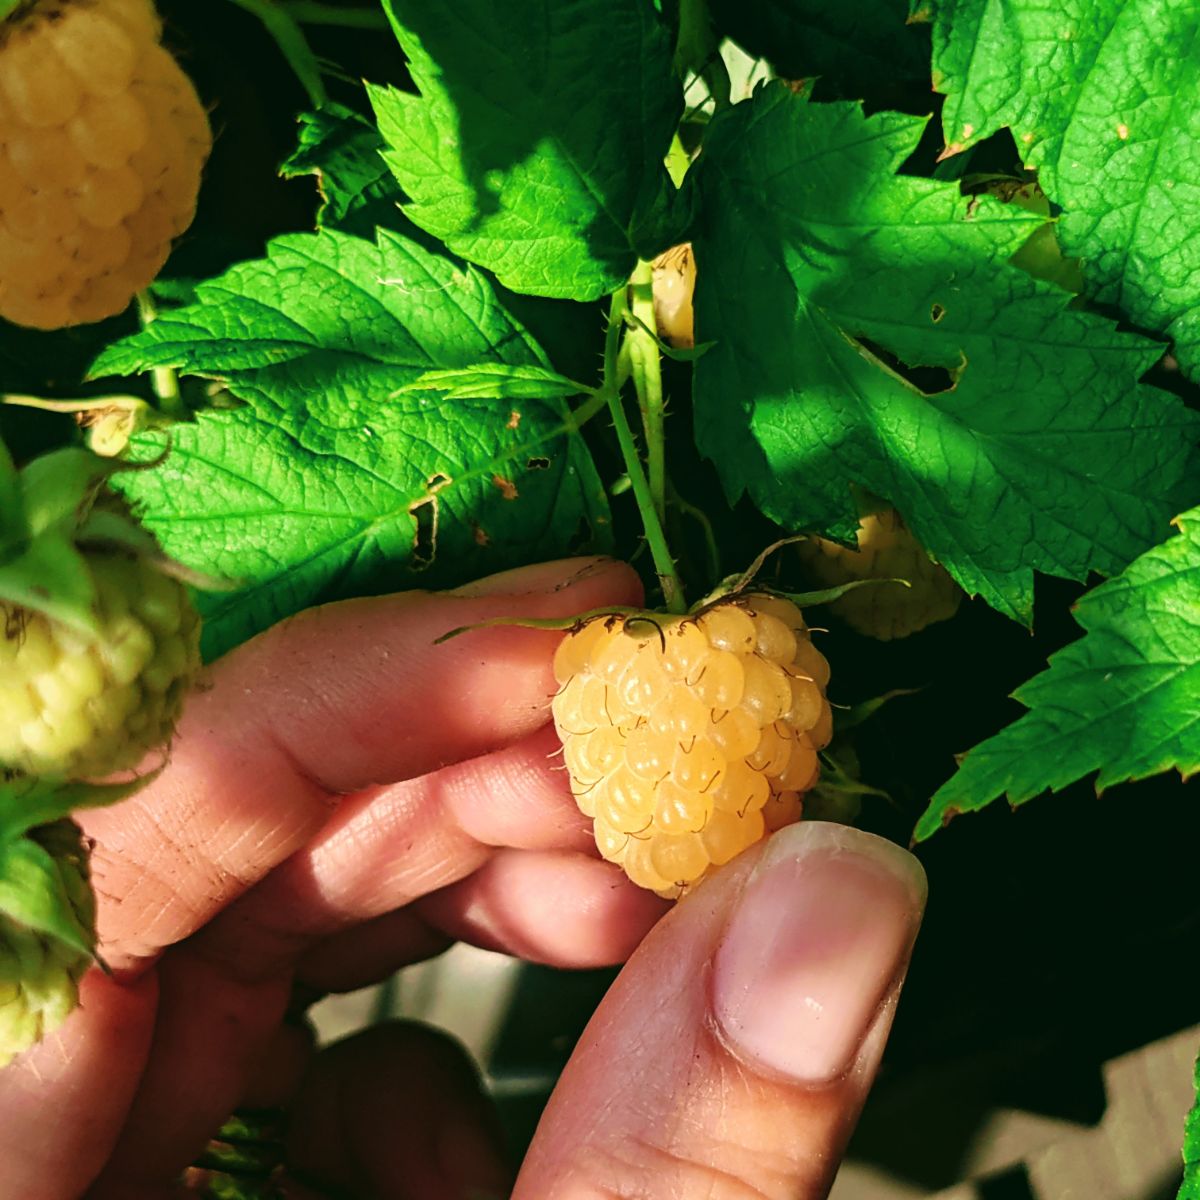 Hand picking golden berry from the plant